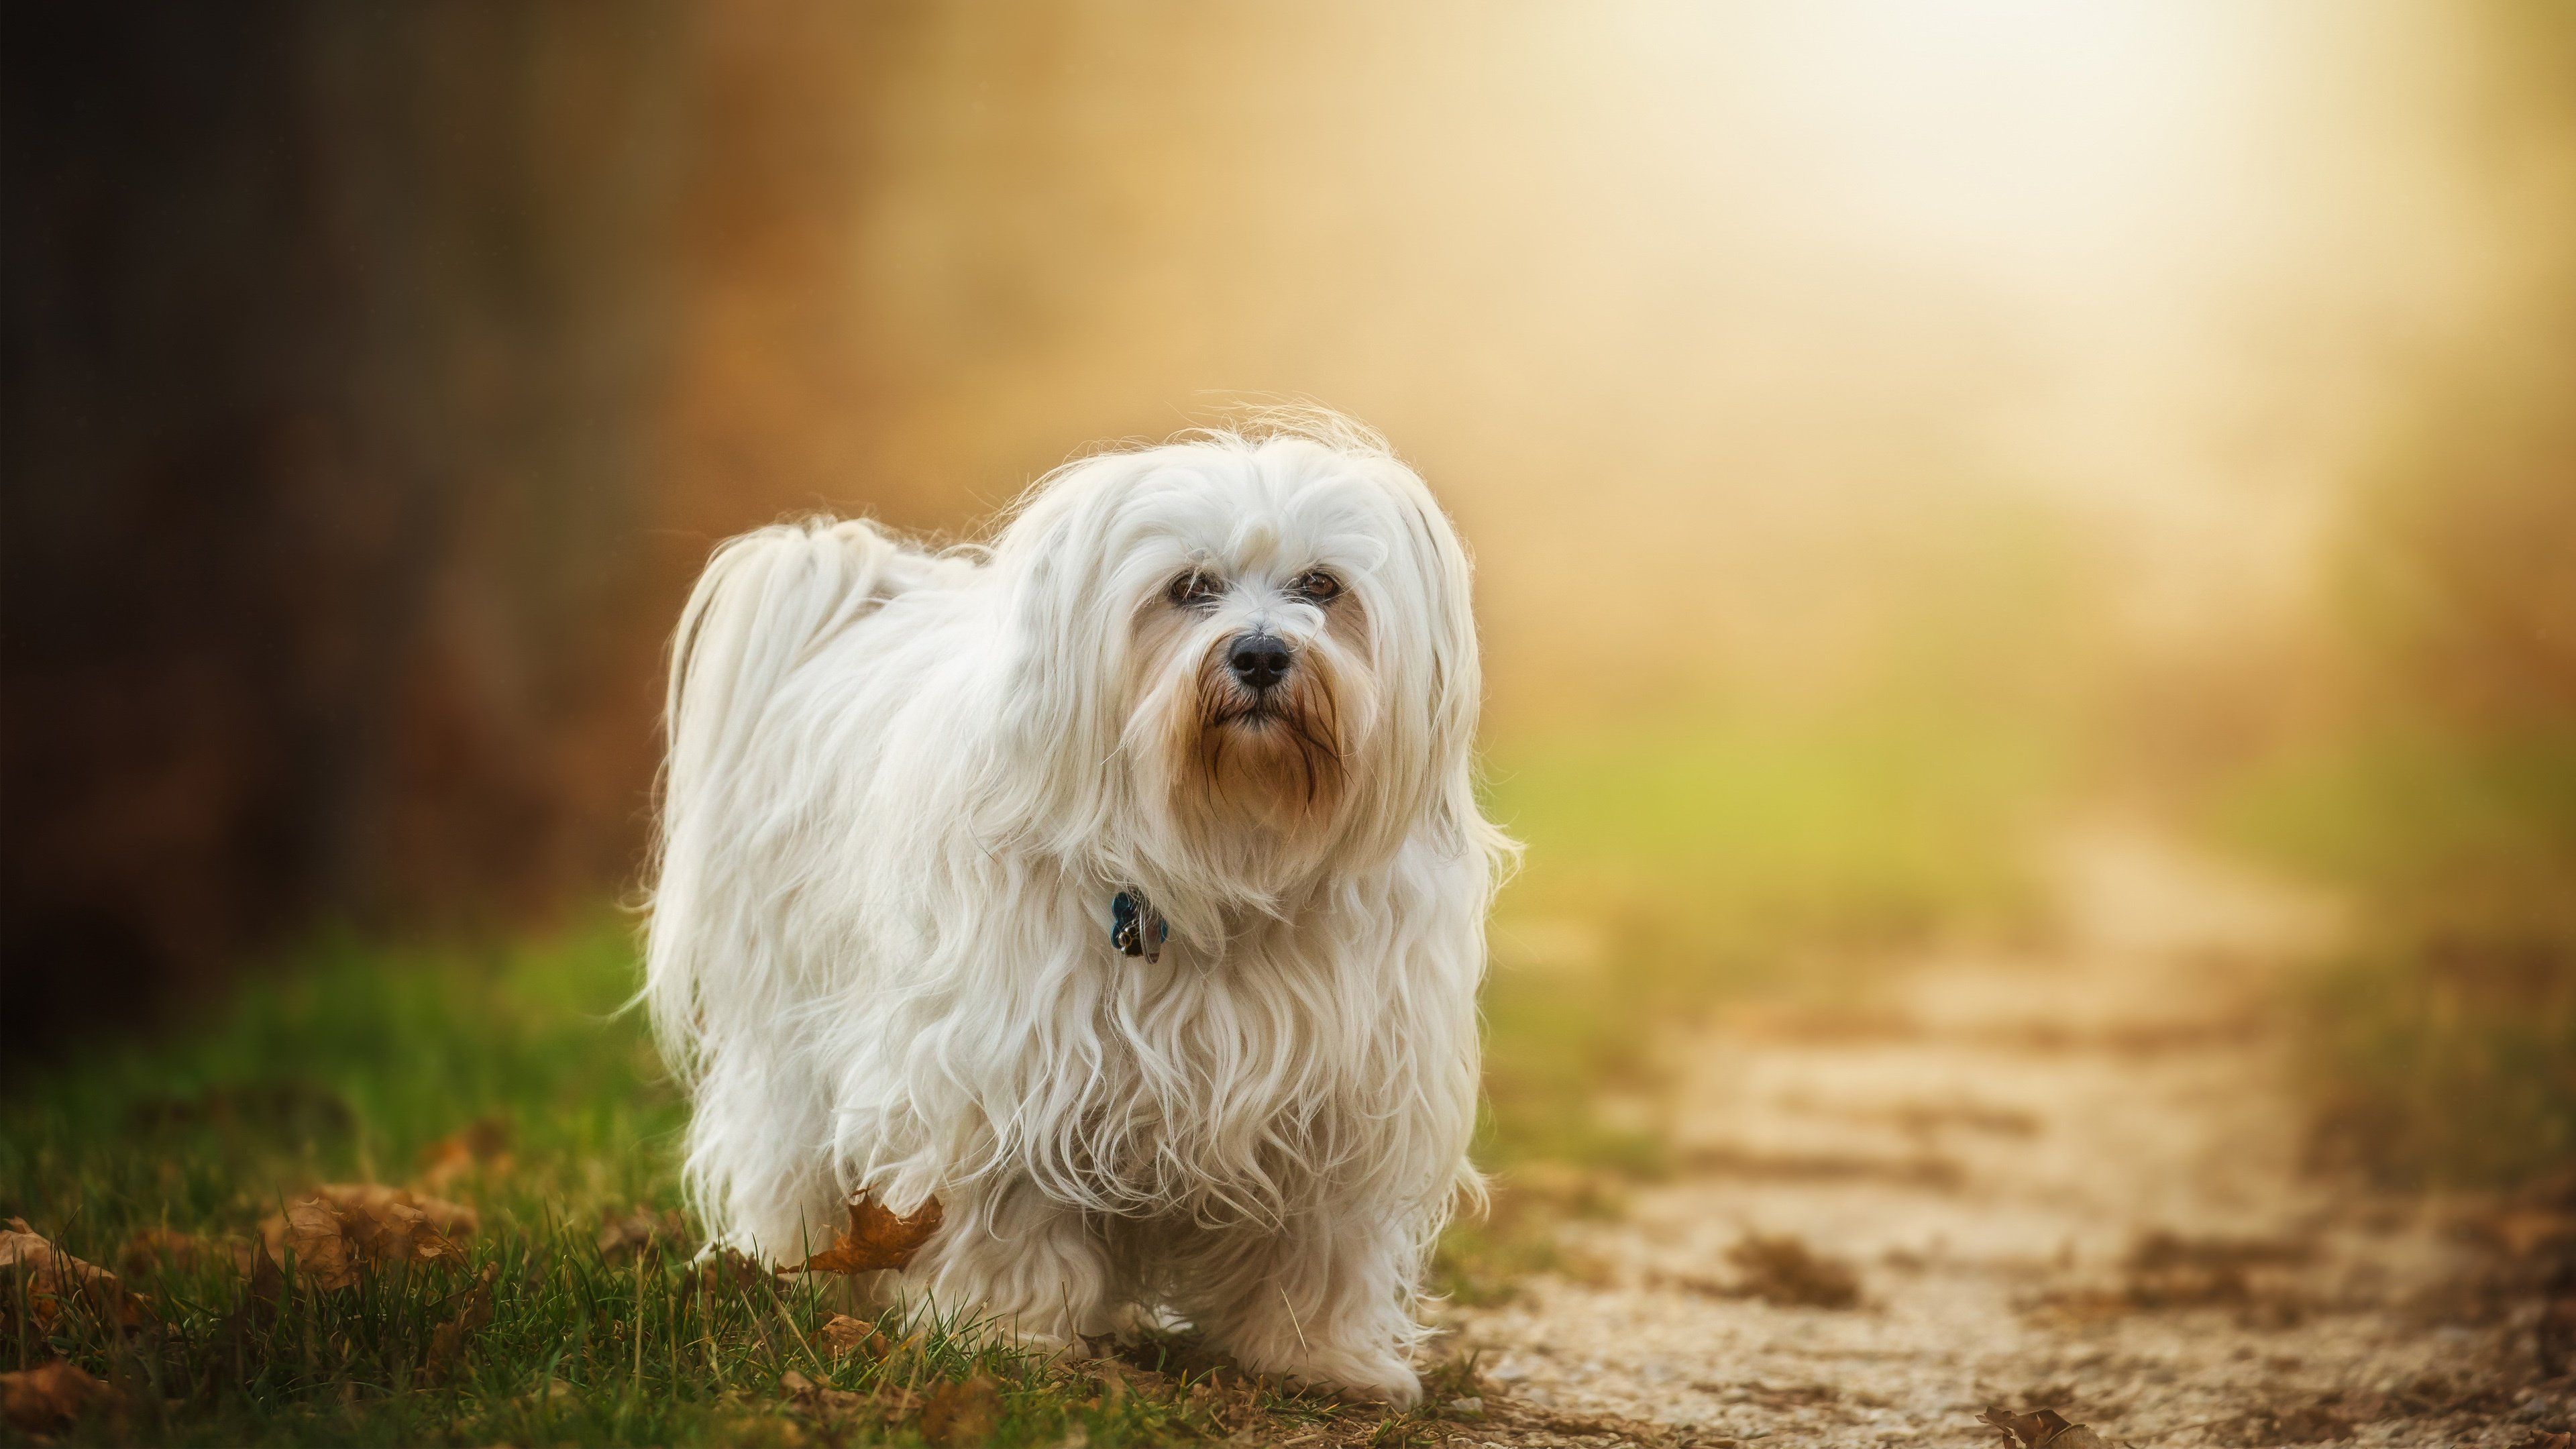 Havanese 4K wallpaper for your desktop or mobile screen free and easy to download